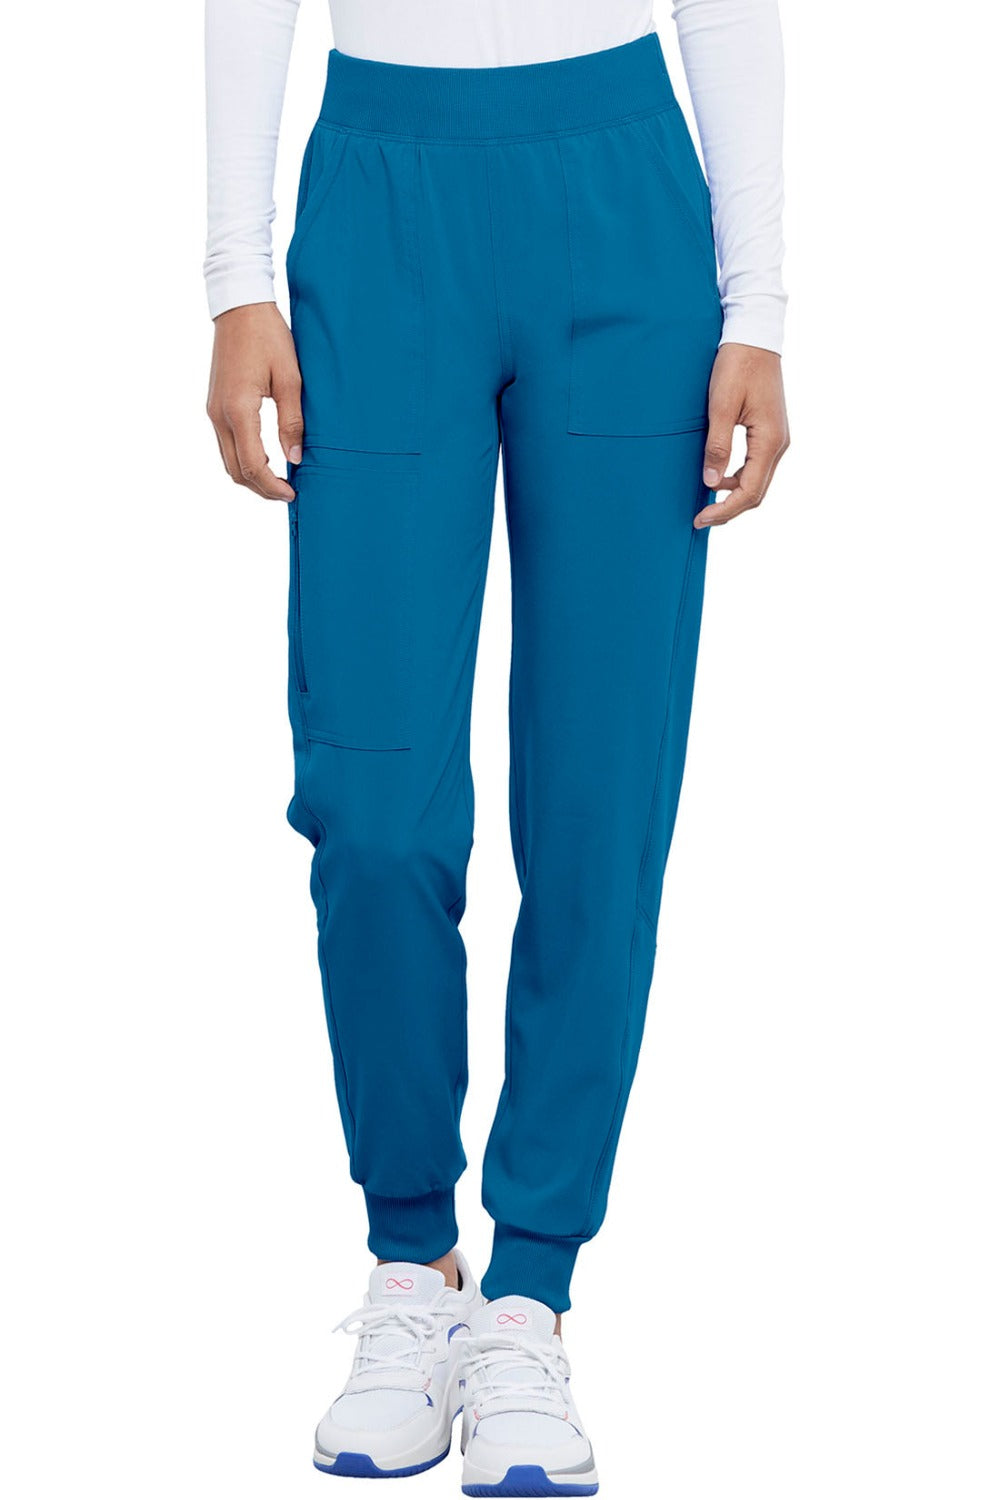 Cherokee Allura Petite Scrub Pant Pull On Jogger in Caribbean at Parker's Clothing and Shoes.